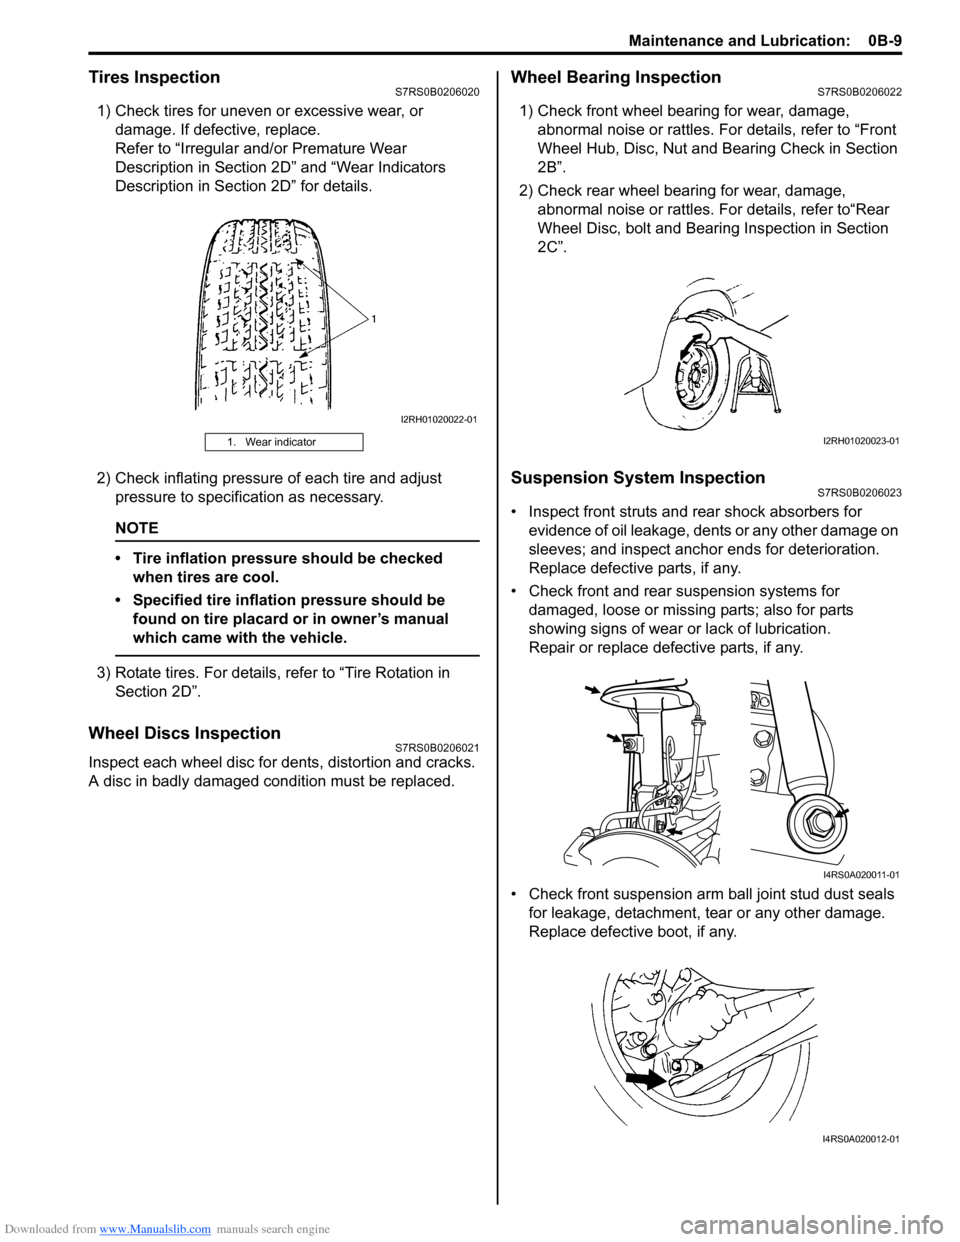 SUZUKI SWIFT 2008 2.G Service Workshop Manual Downloaded from www.Manualslib.com manuals search engine Maintenance and Lubrication:  0B-9
Tires InspectionS7RS0B0206020
1) Check tires for uneven or excessive wear, or damage. If defective, replace.